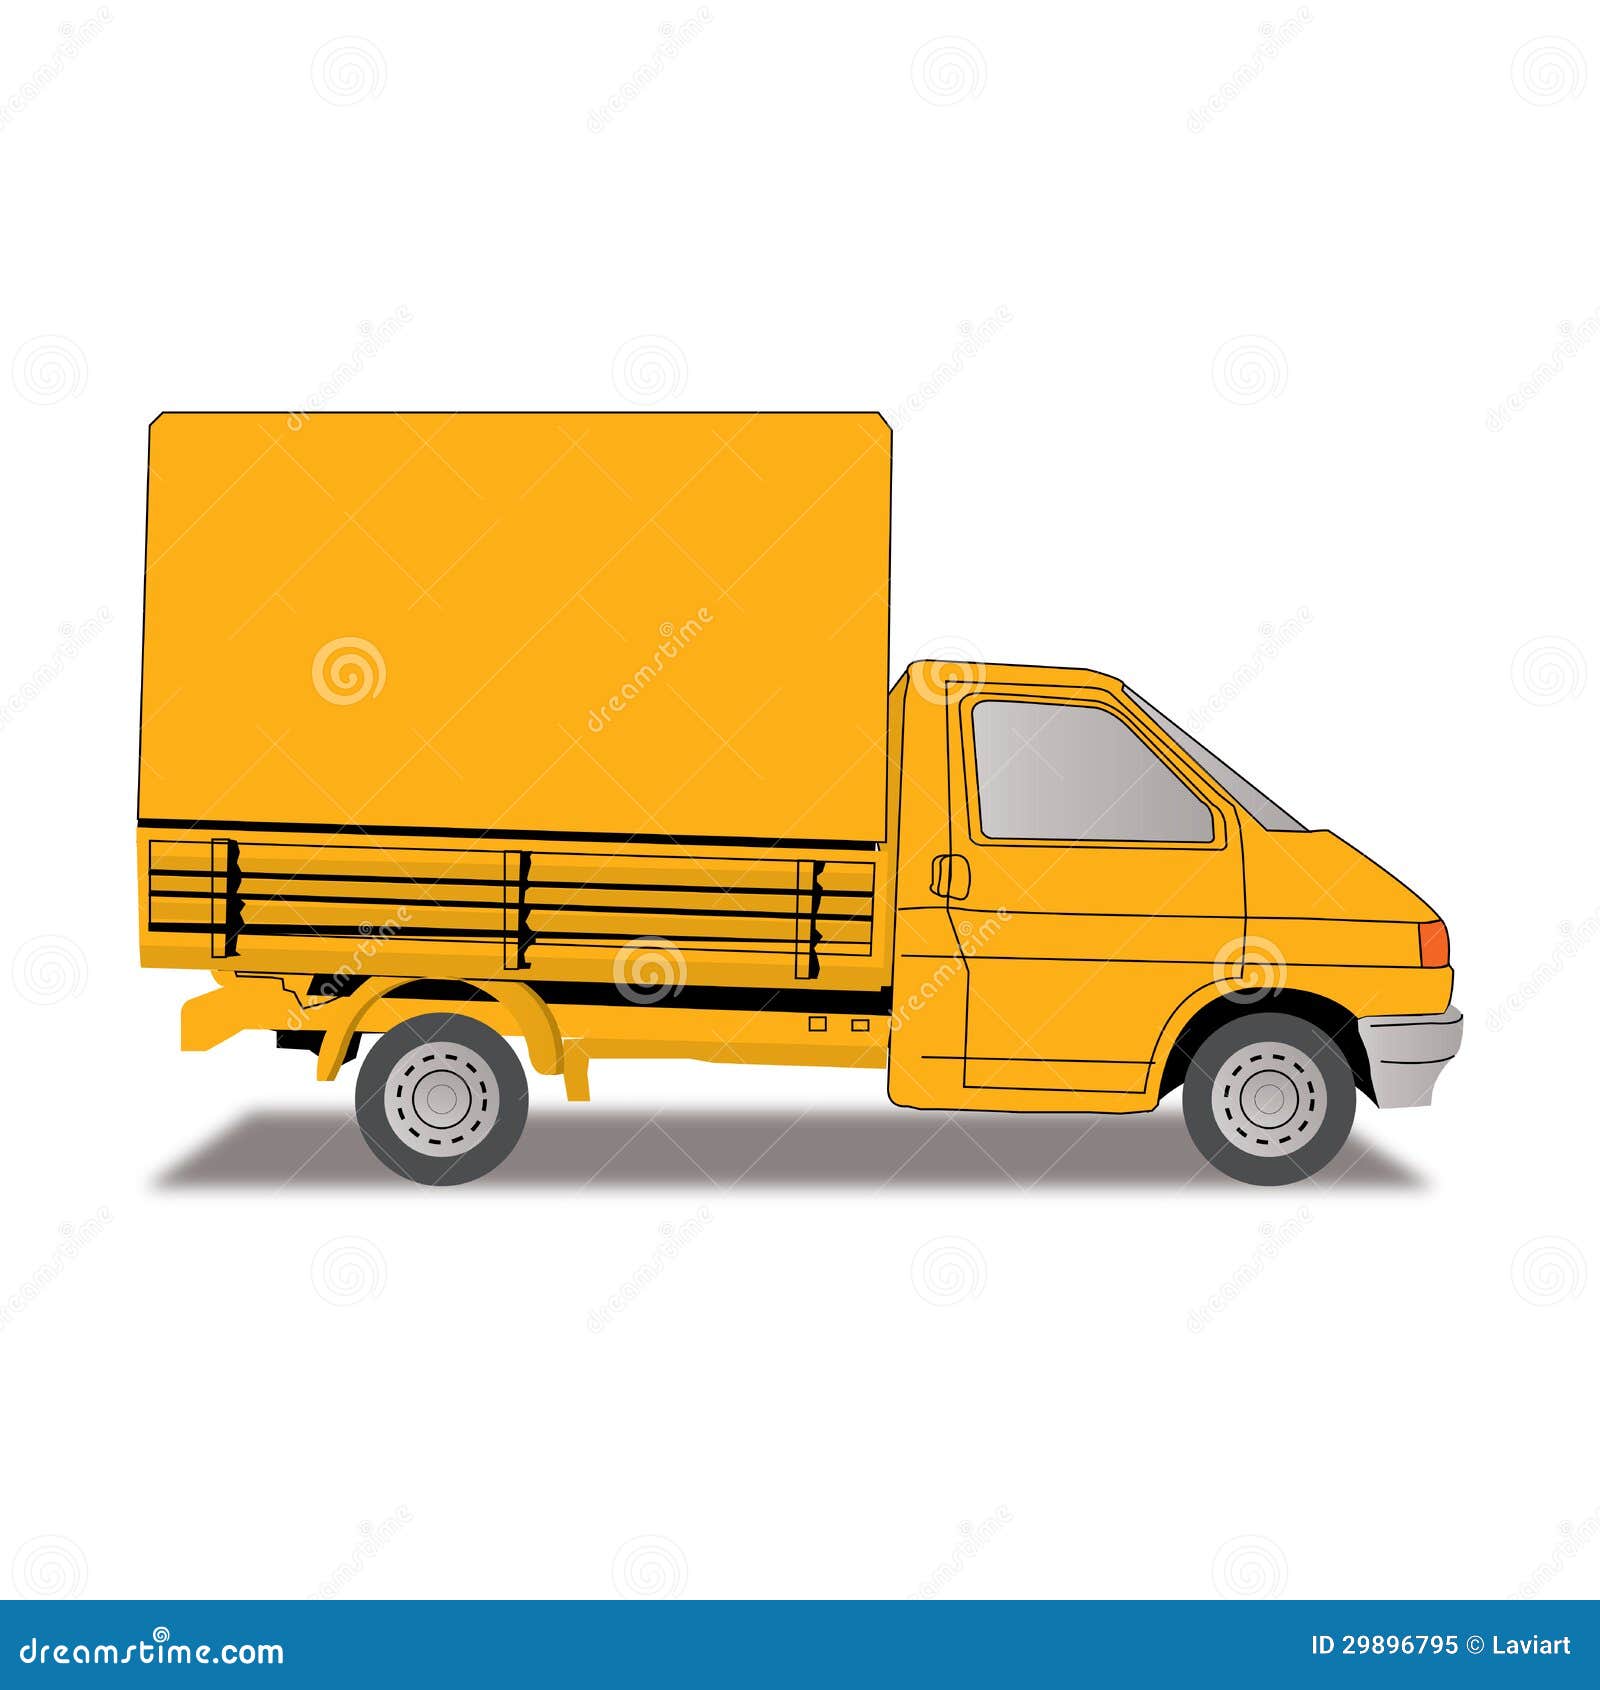 Clipart Truck Royalty Free Stock Photo  Image: 29896795